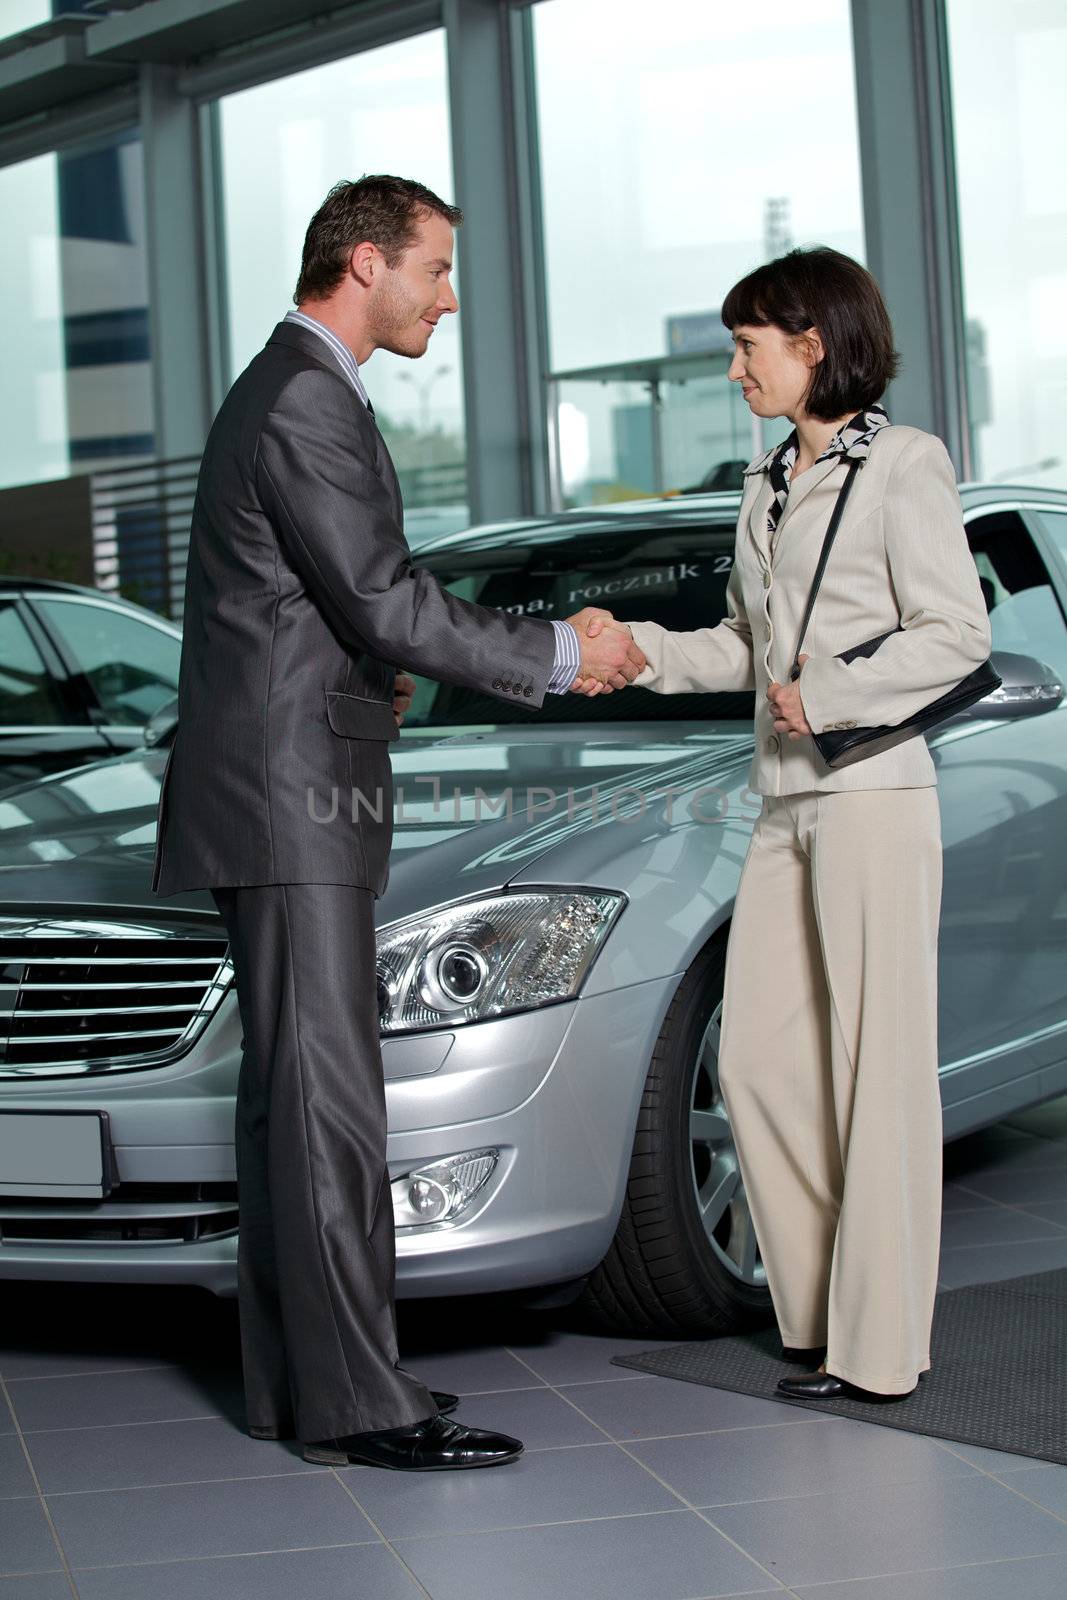 Car salesperson shaking hands with customer at showroom by krzysiek_z_poczty